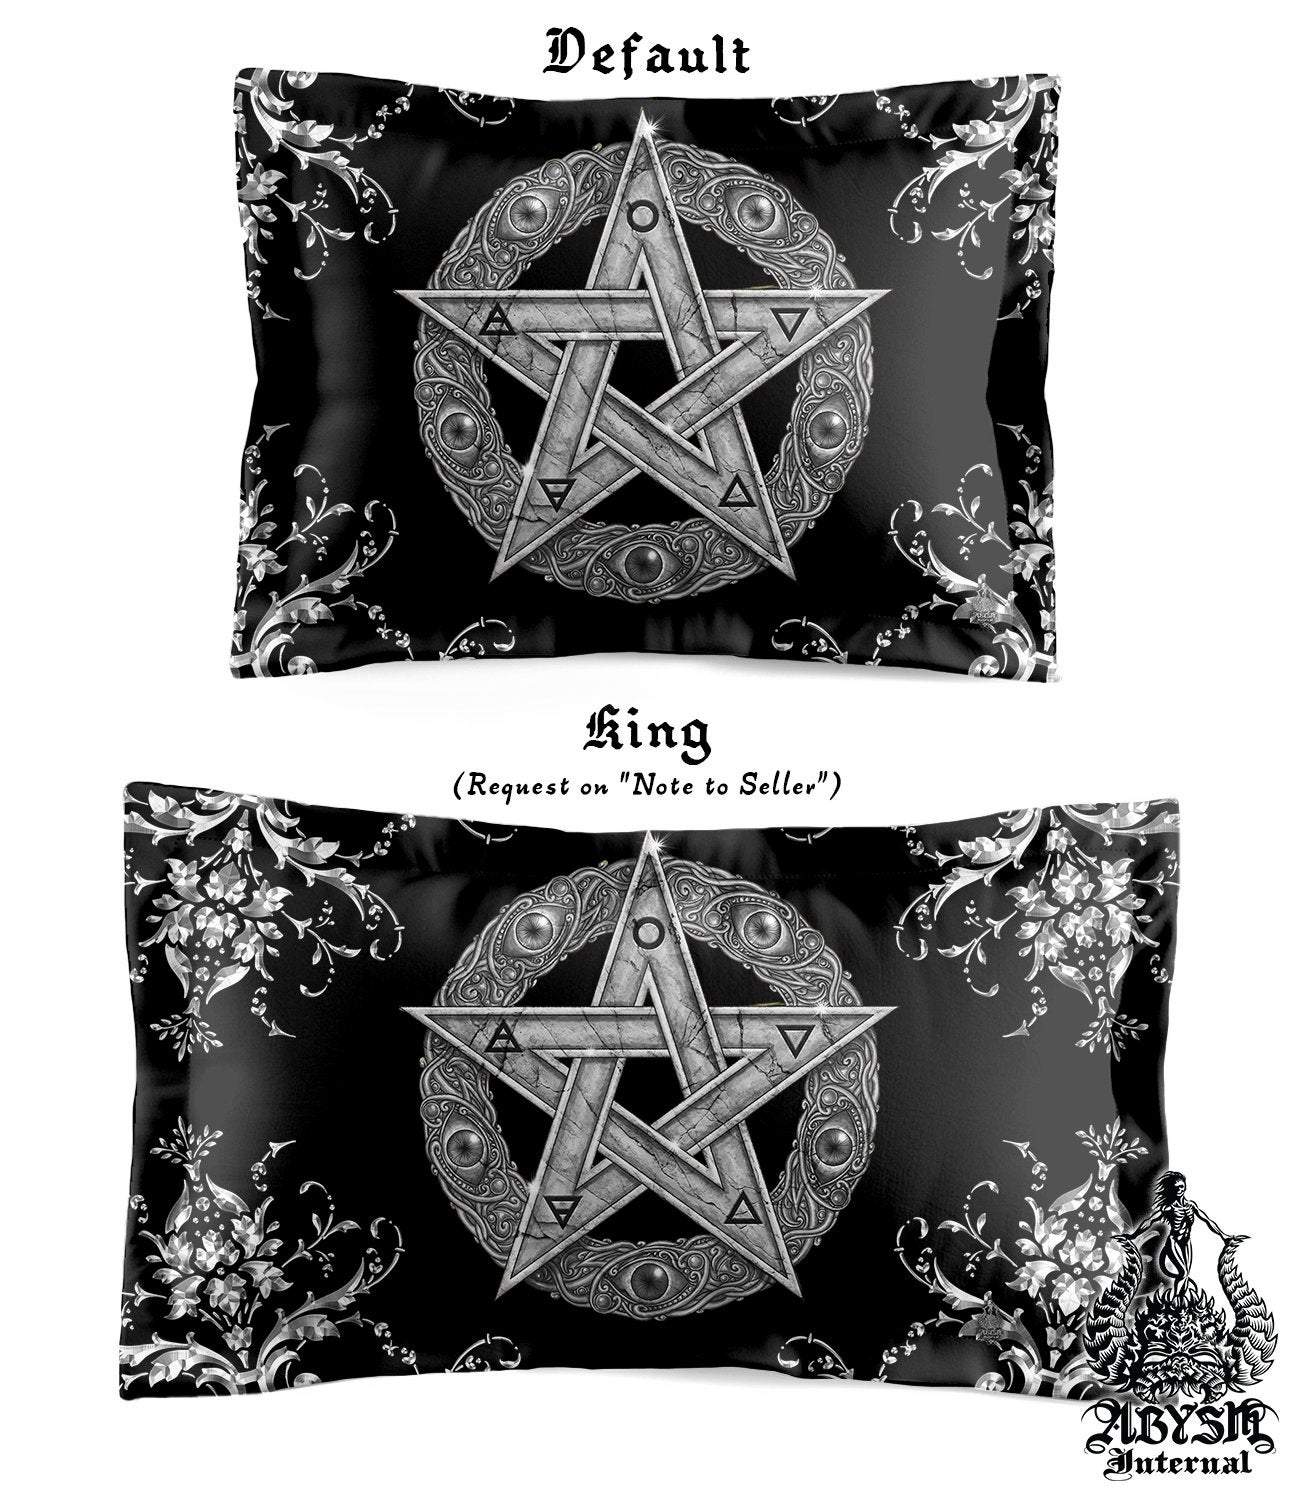 Witchy Bedding Set, Comforter and Duvet, Wiccan Bed Cover and Pagan Bedroom Decor, King, Queen and Twin Size - Silver Pentacle - Abysm Internal